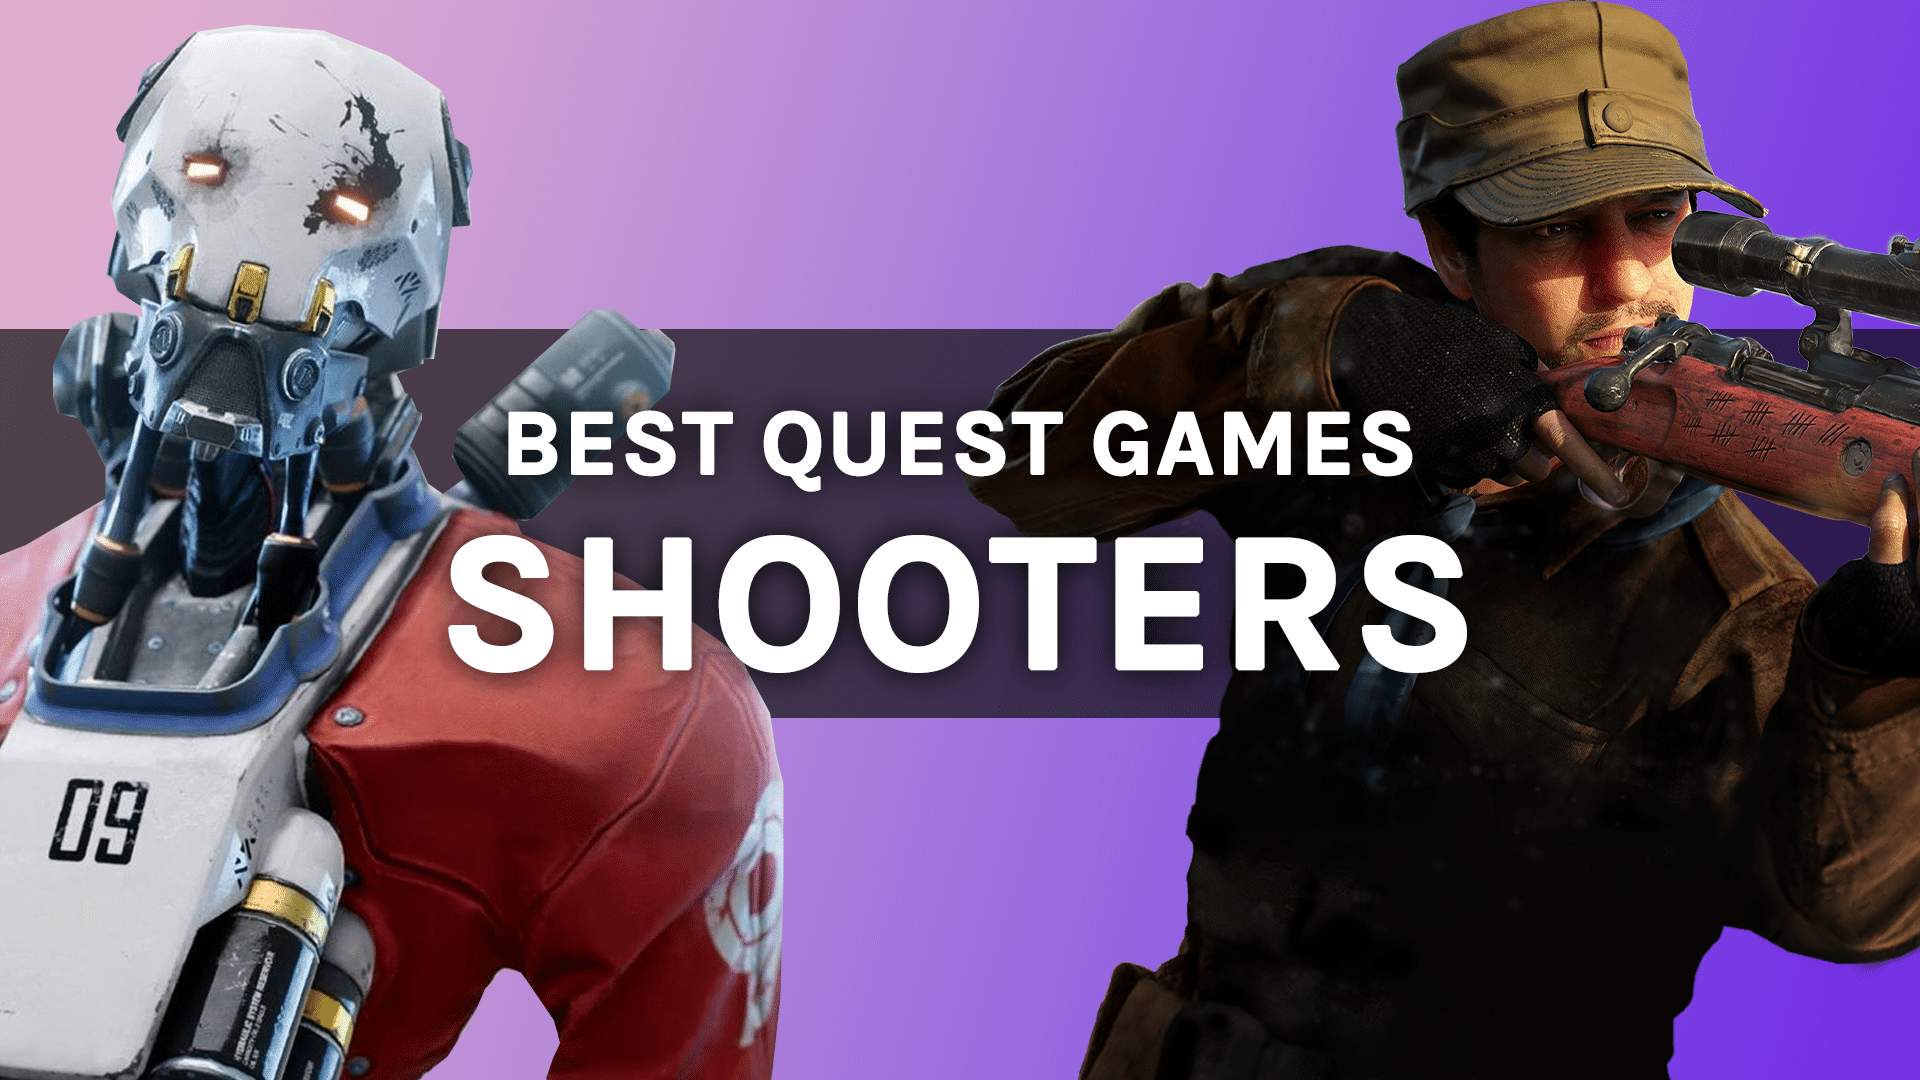 Best Quest Games Shooters 